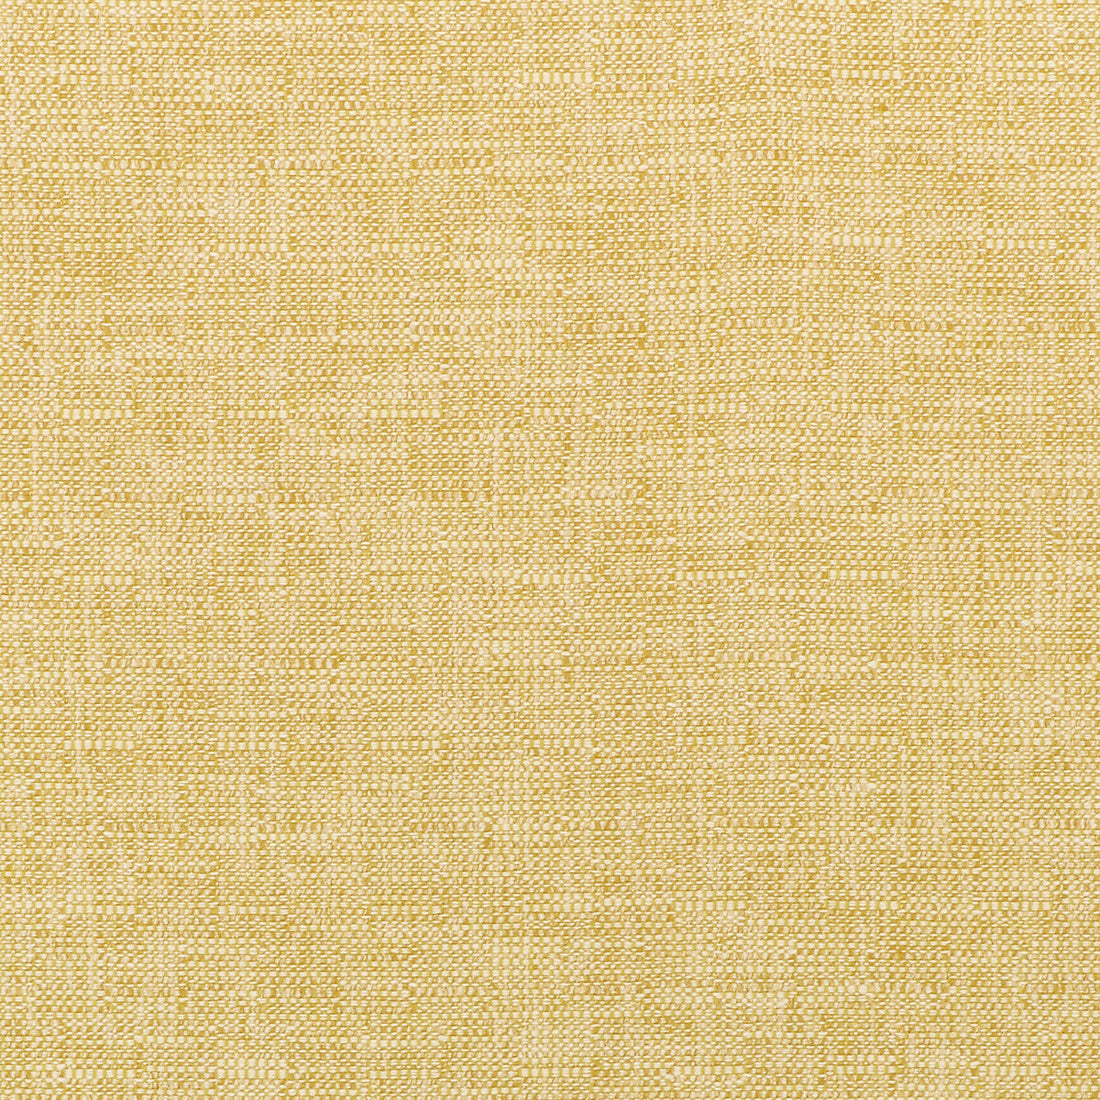 Kravet Smart fabric in 35518-14 color - pattern 35518.14.0 - by Kravet Smart in the Inside Out Performance Fabrics collection